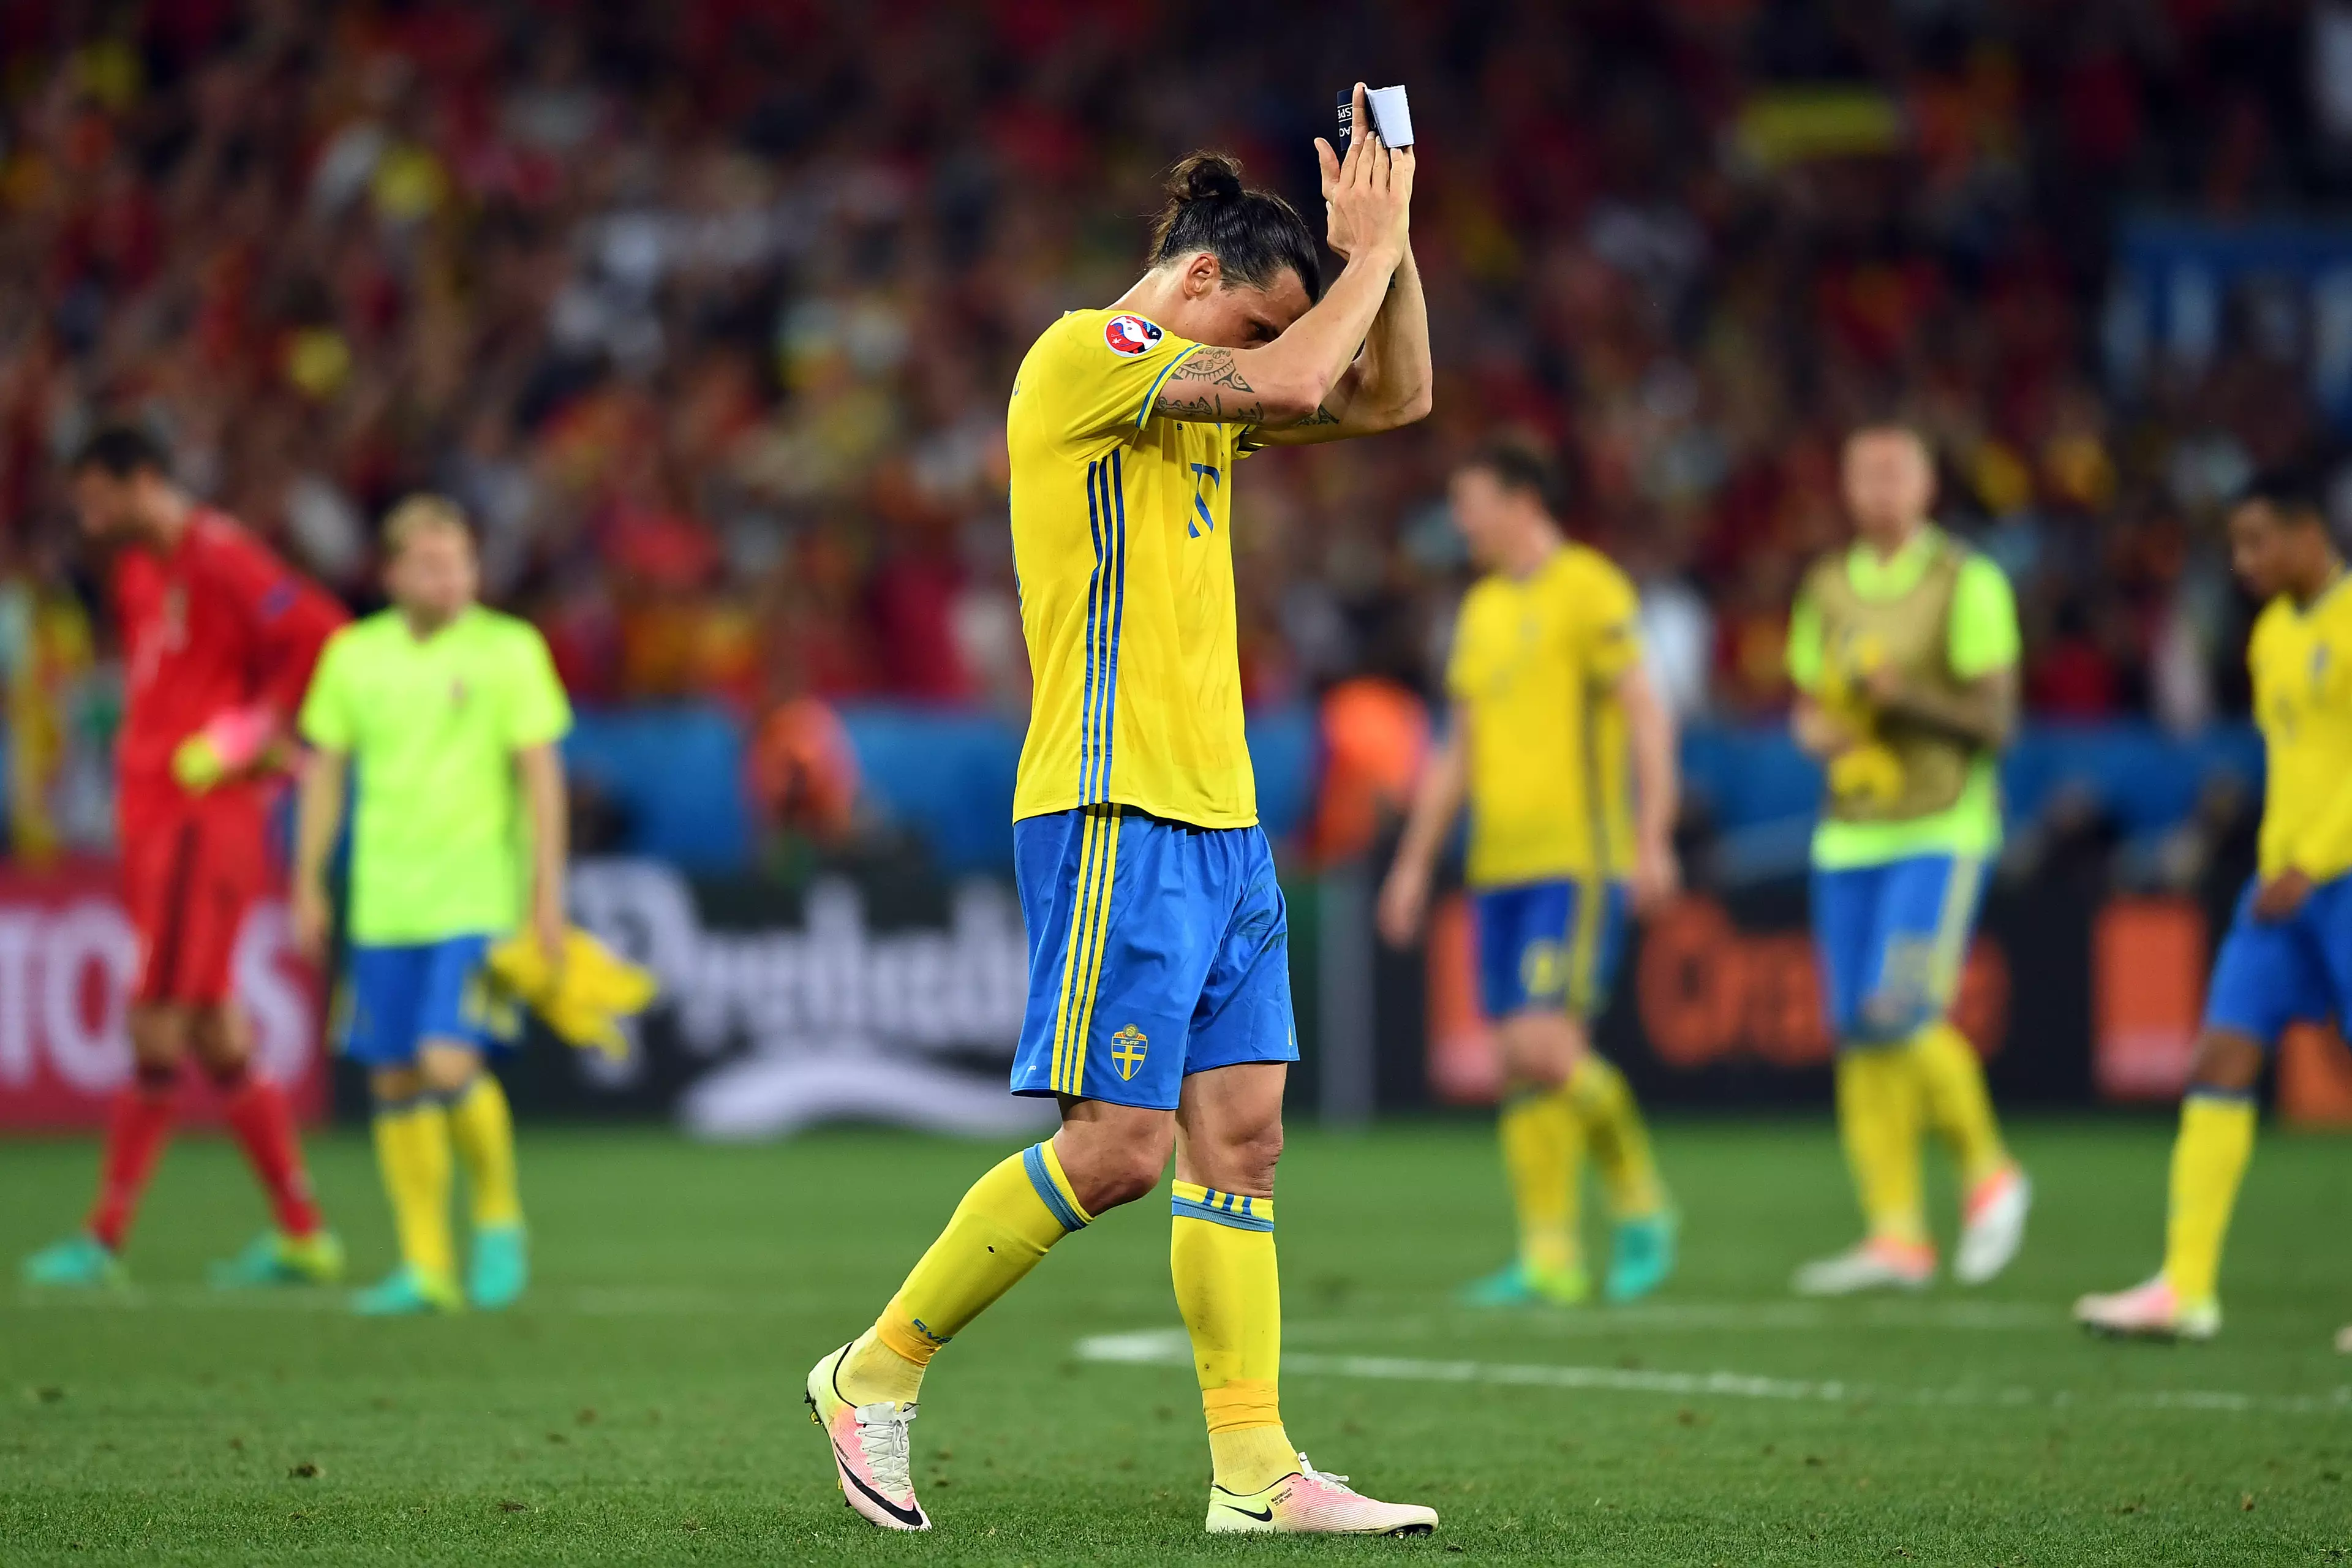 Zlatan applauds the fans after his previous game with the national team. Image: PA Images